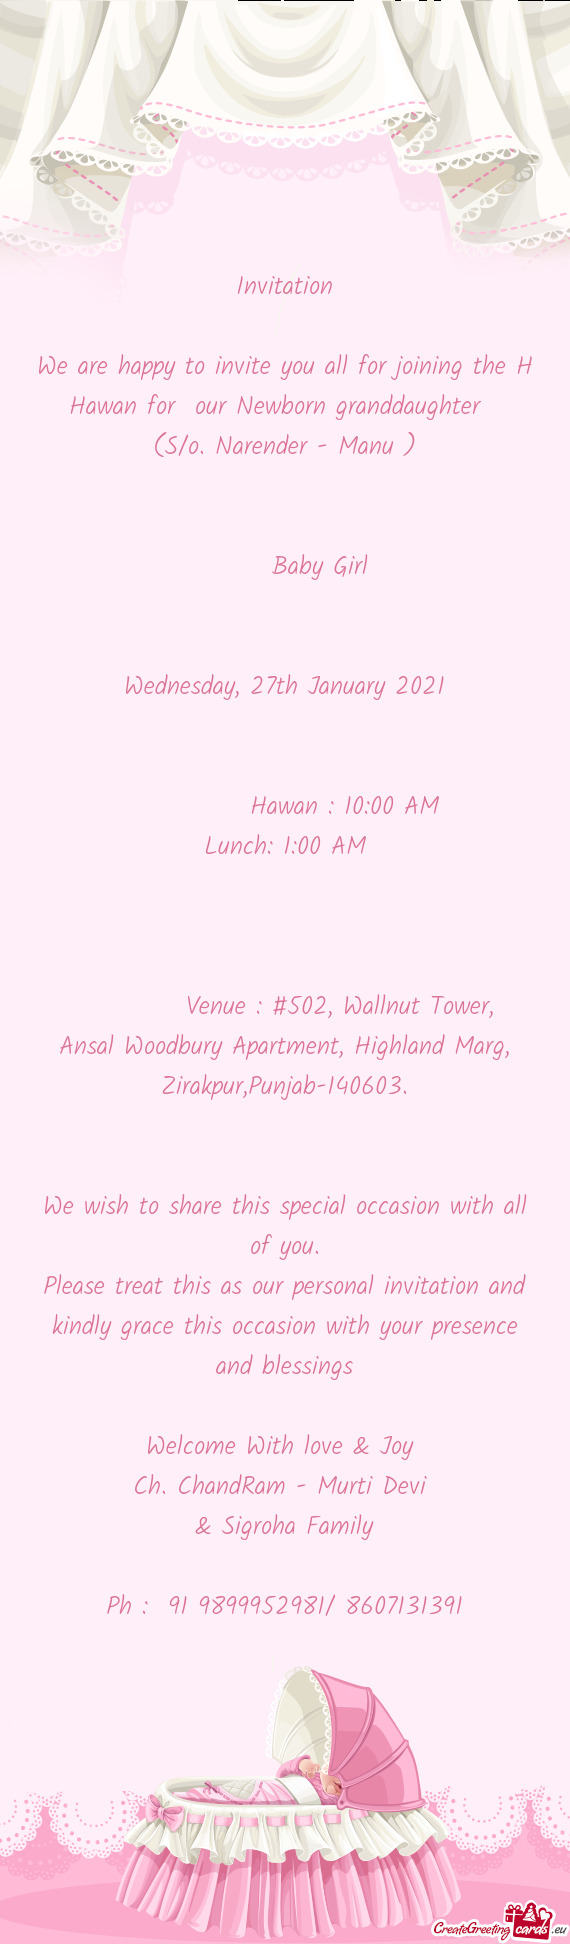 We are happy to invite you all for joining the H